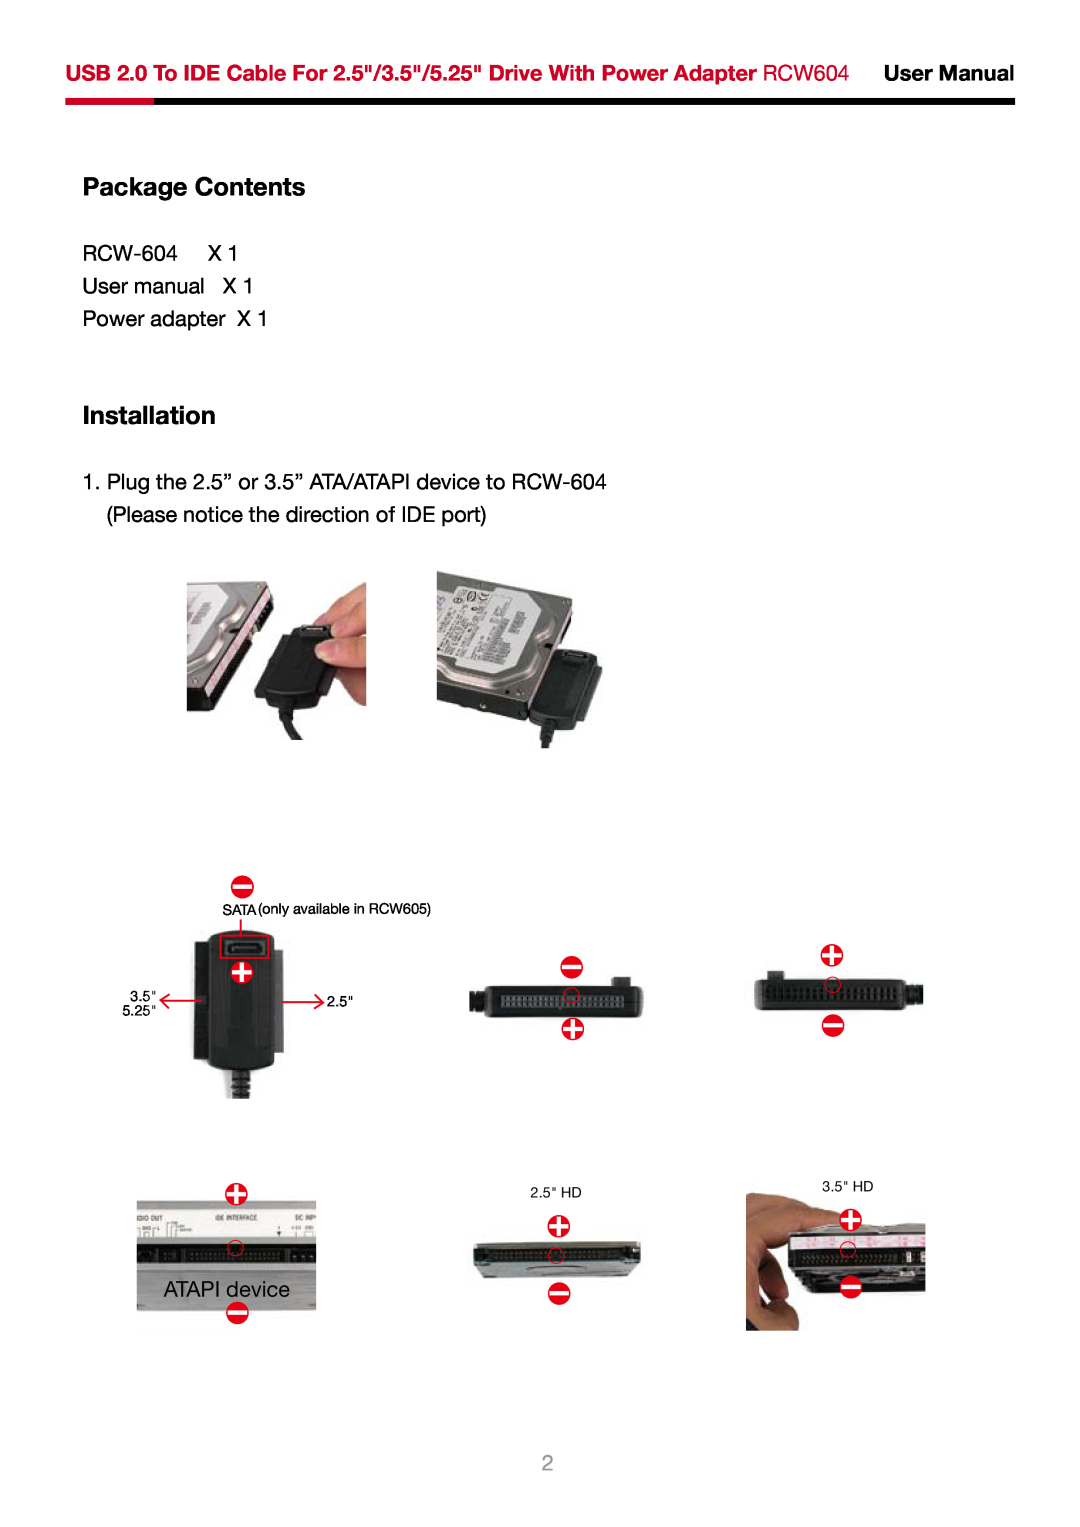 Rosewill RCW604 user manual Package Contents, Installation, SATA only available in RCW605, 5.25, 2.5 HD, 3.5 HD 